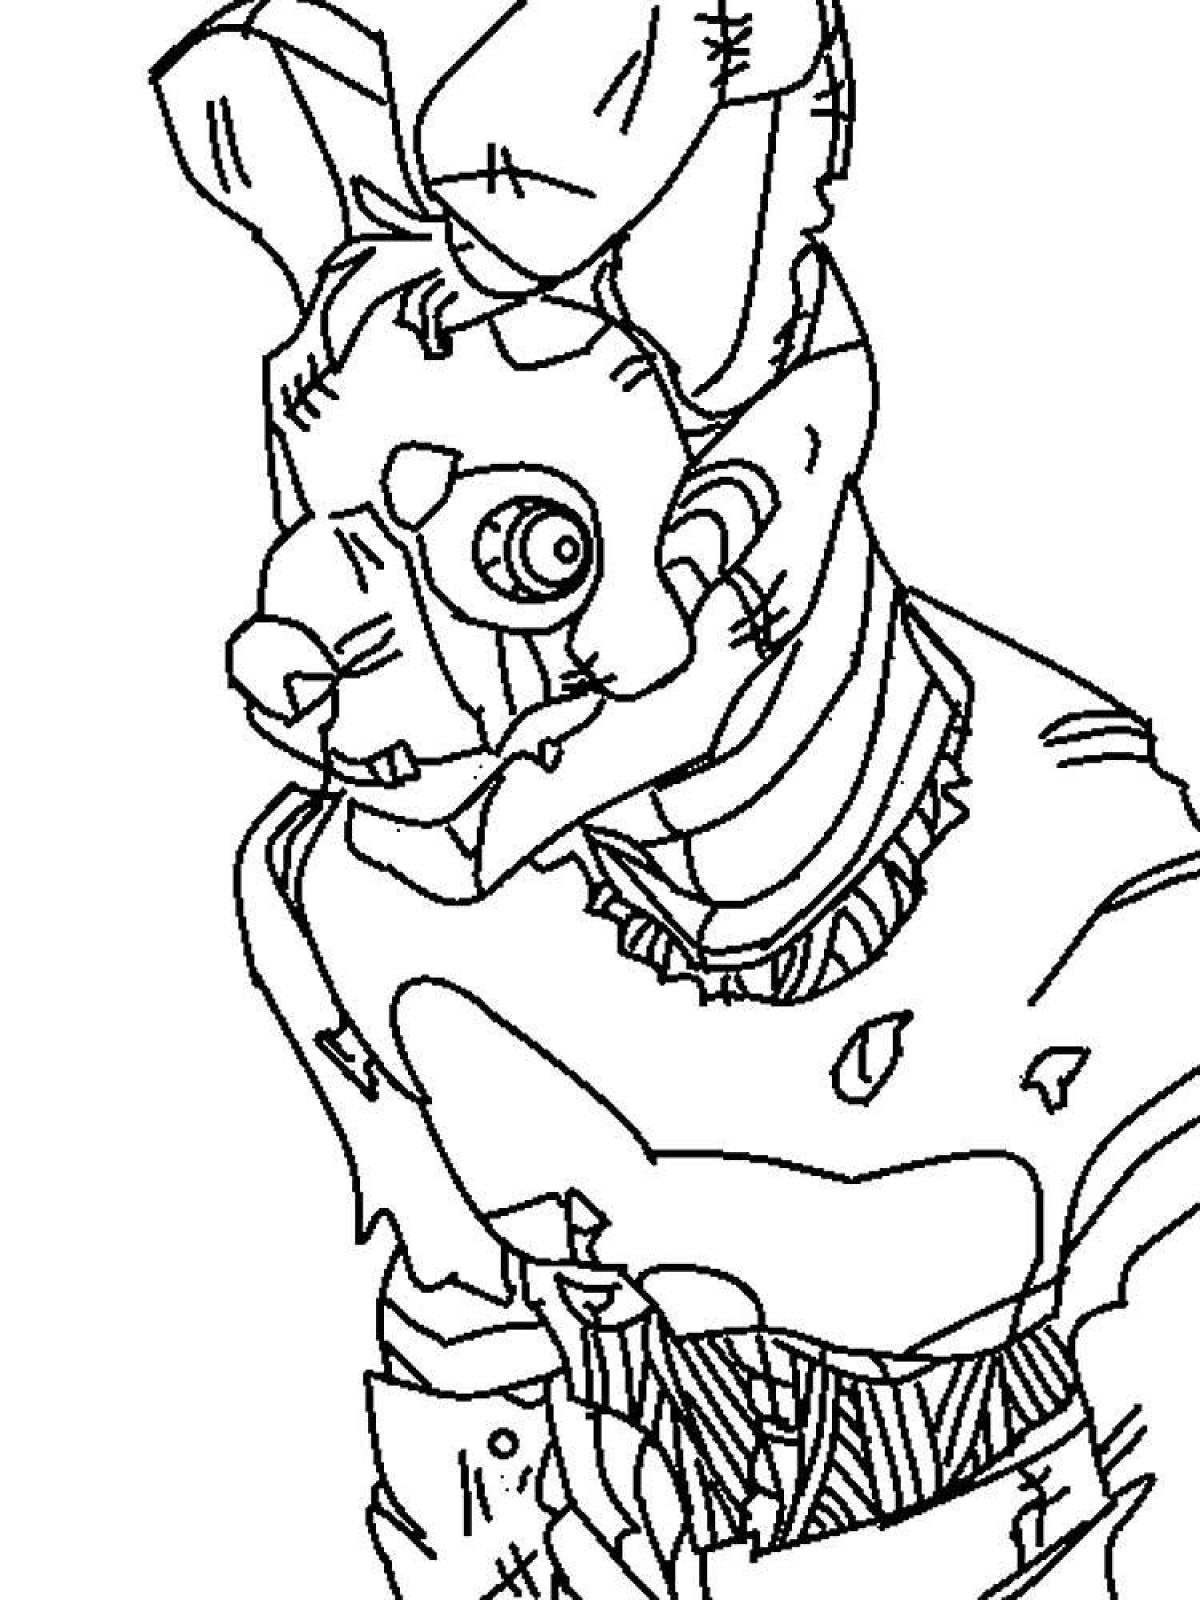 Springtrap stimulating coloring page